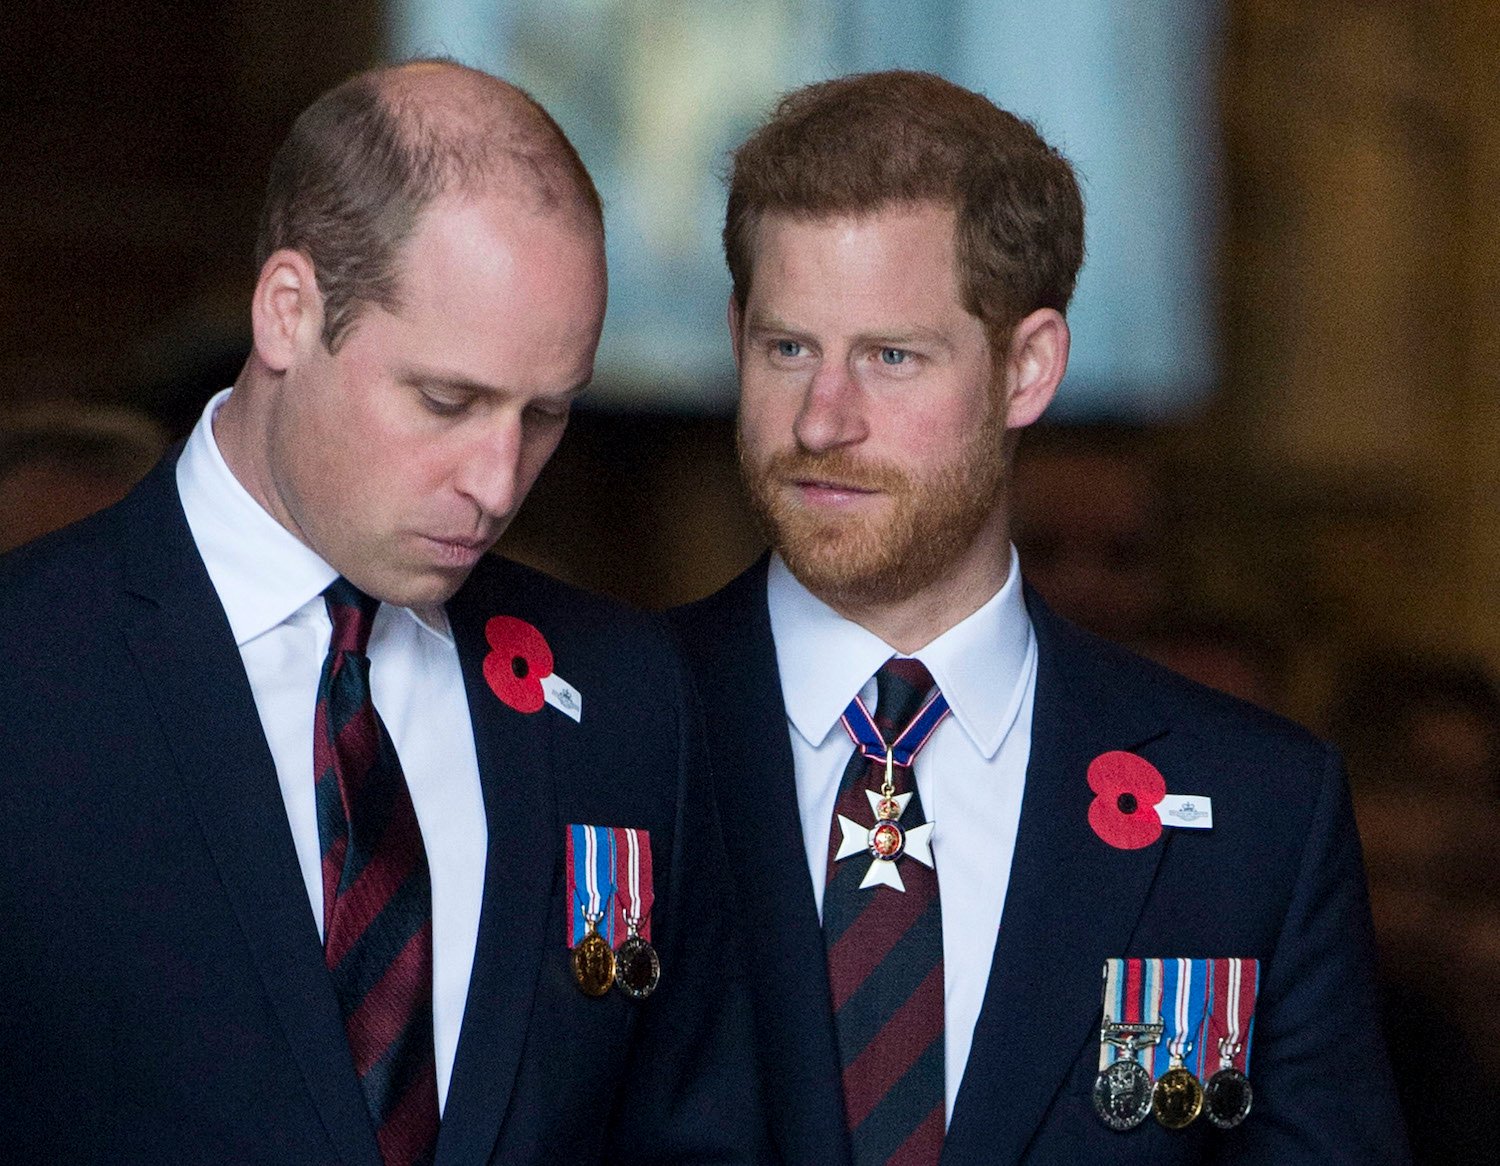 Prince William and Prince Harry attend an Anzac Day service at Westminster Abbey